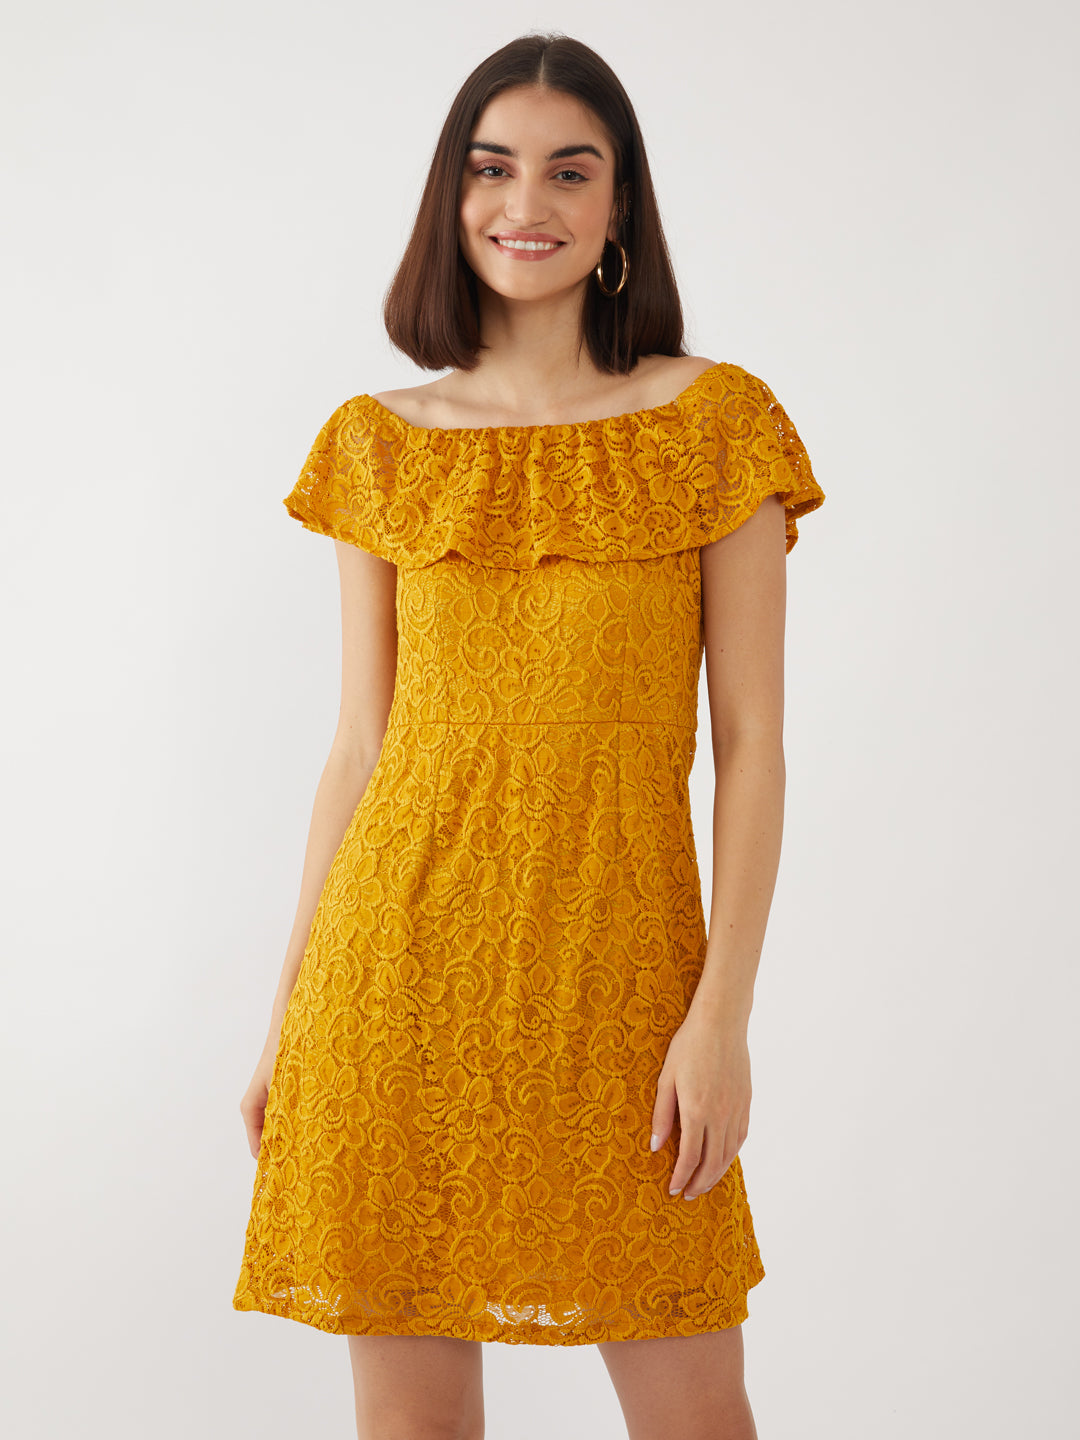 Yellow Lace Offhoulder Short Dress For Women